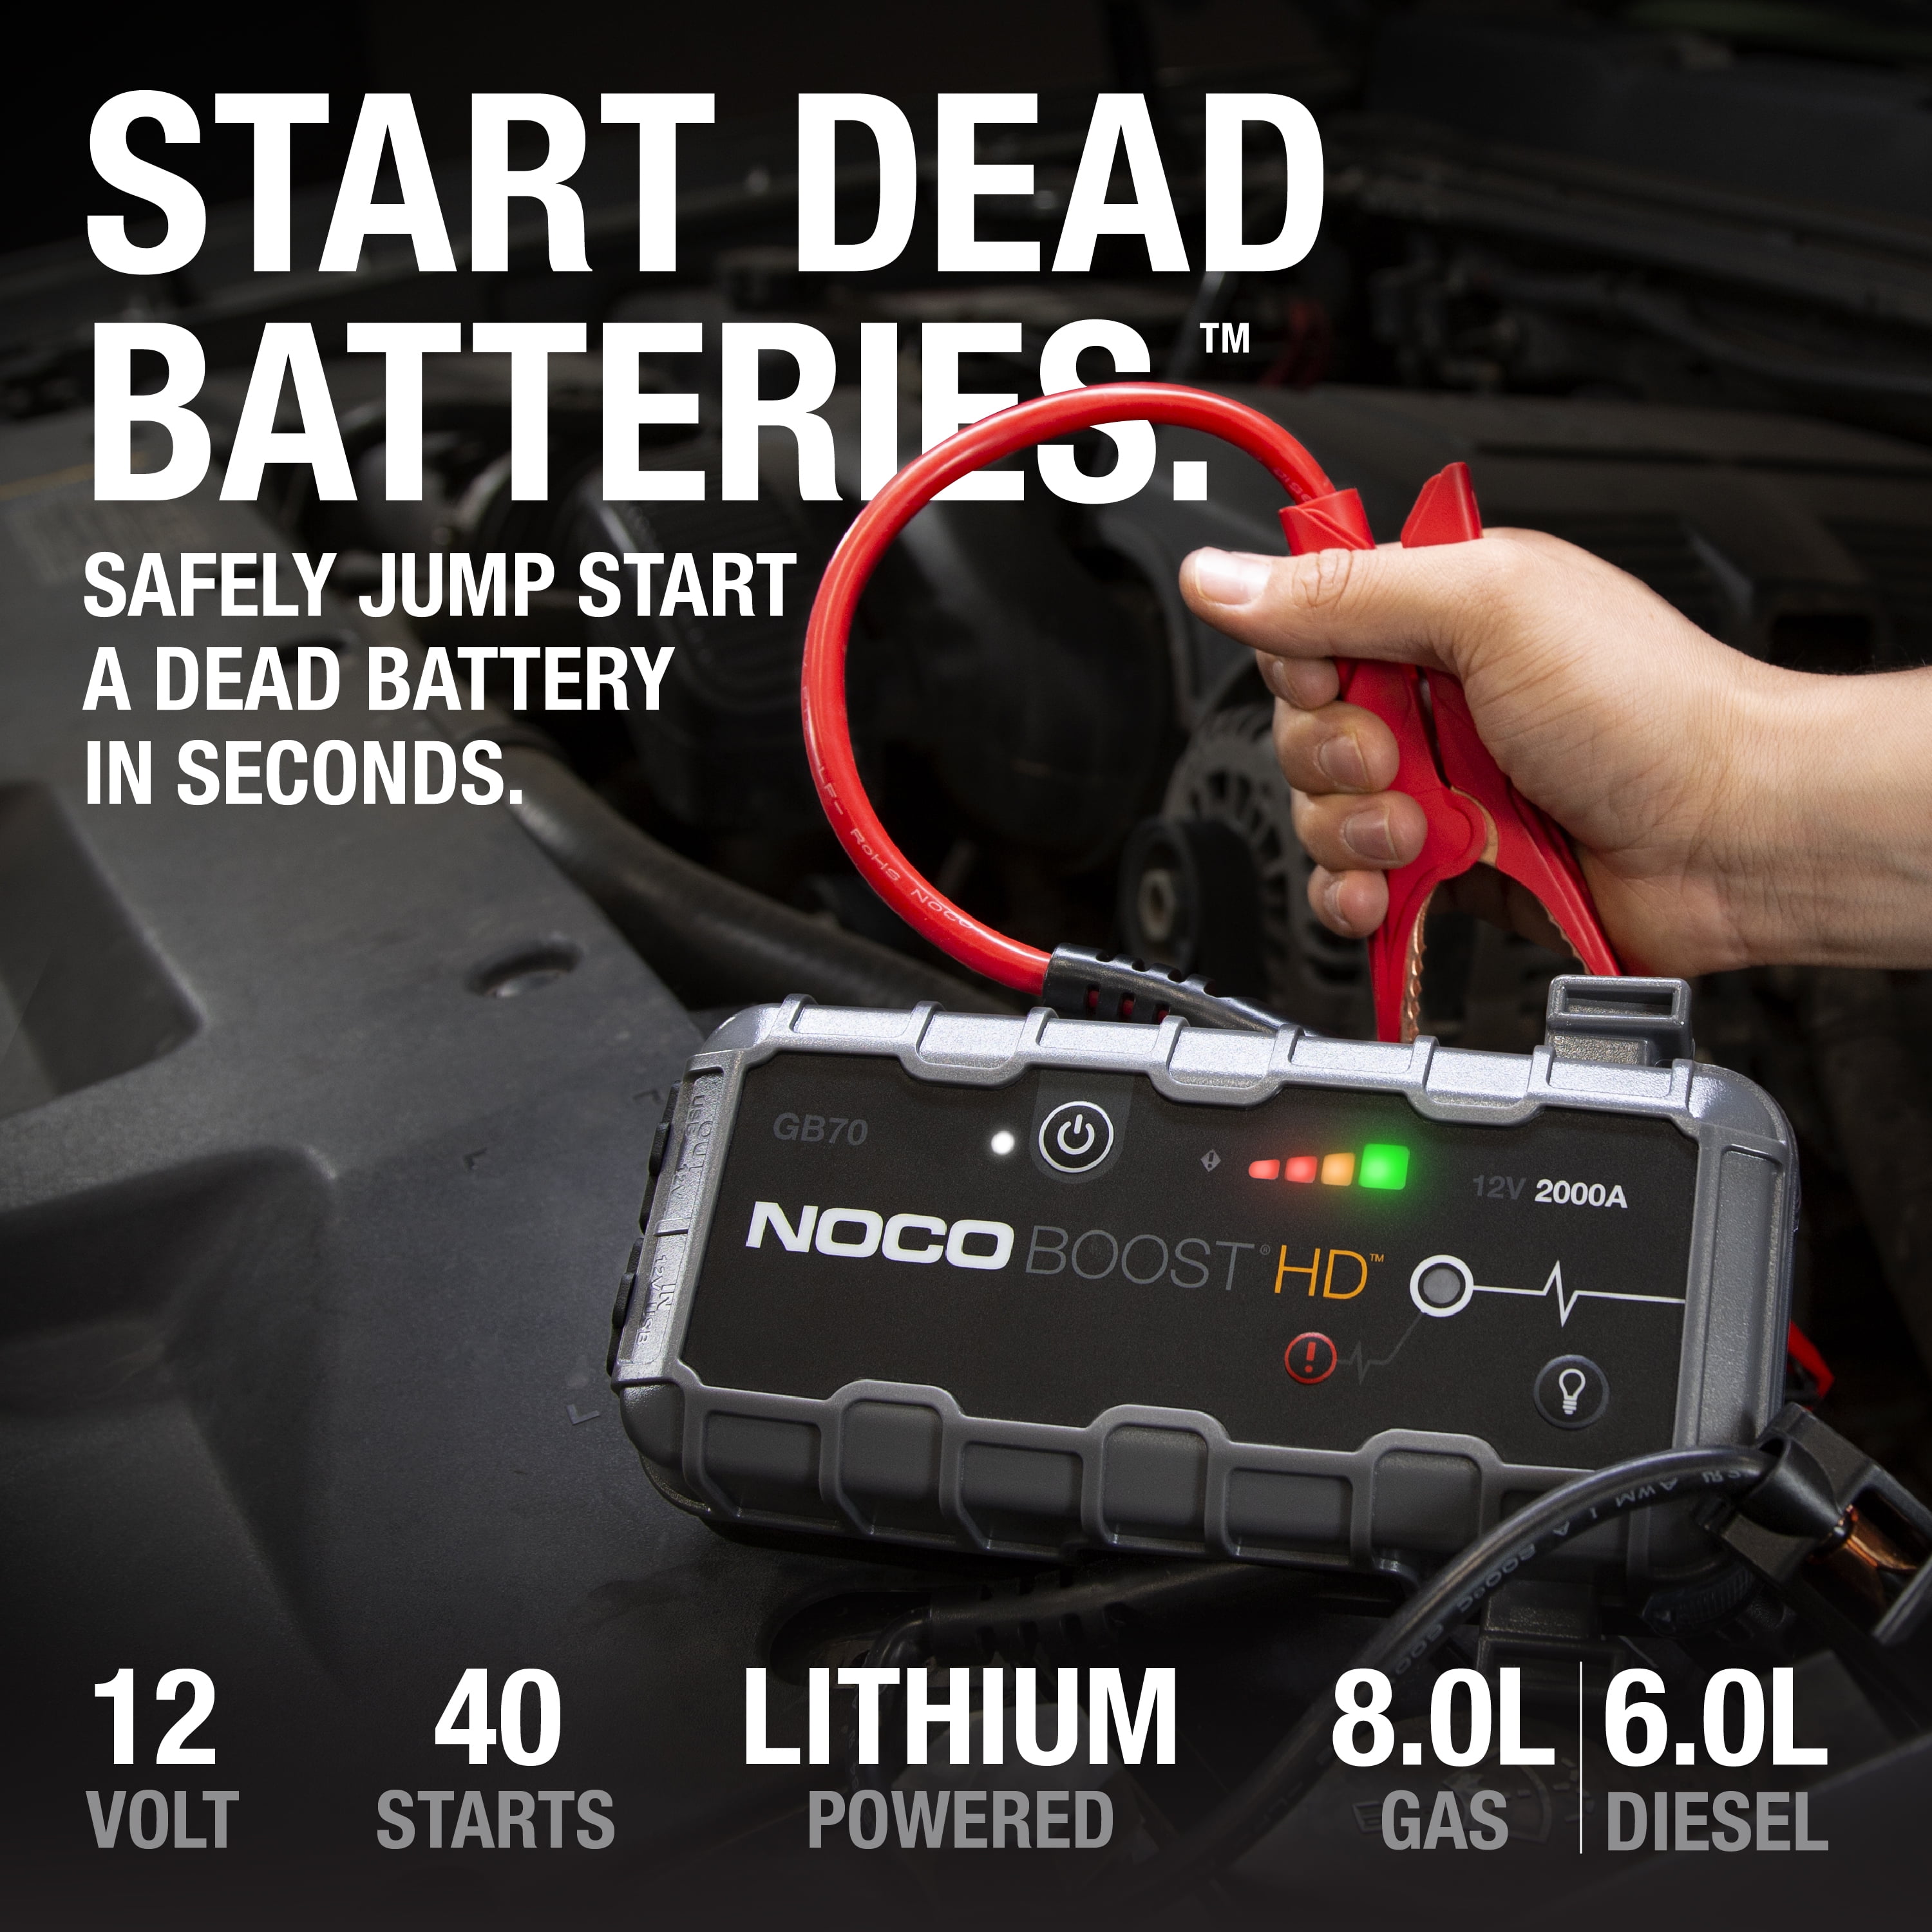 NOCO GB70 and GBX75 Jump Starter 